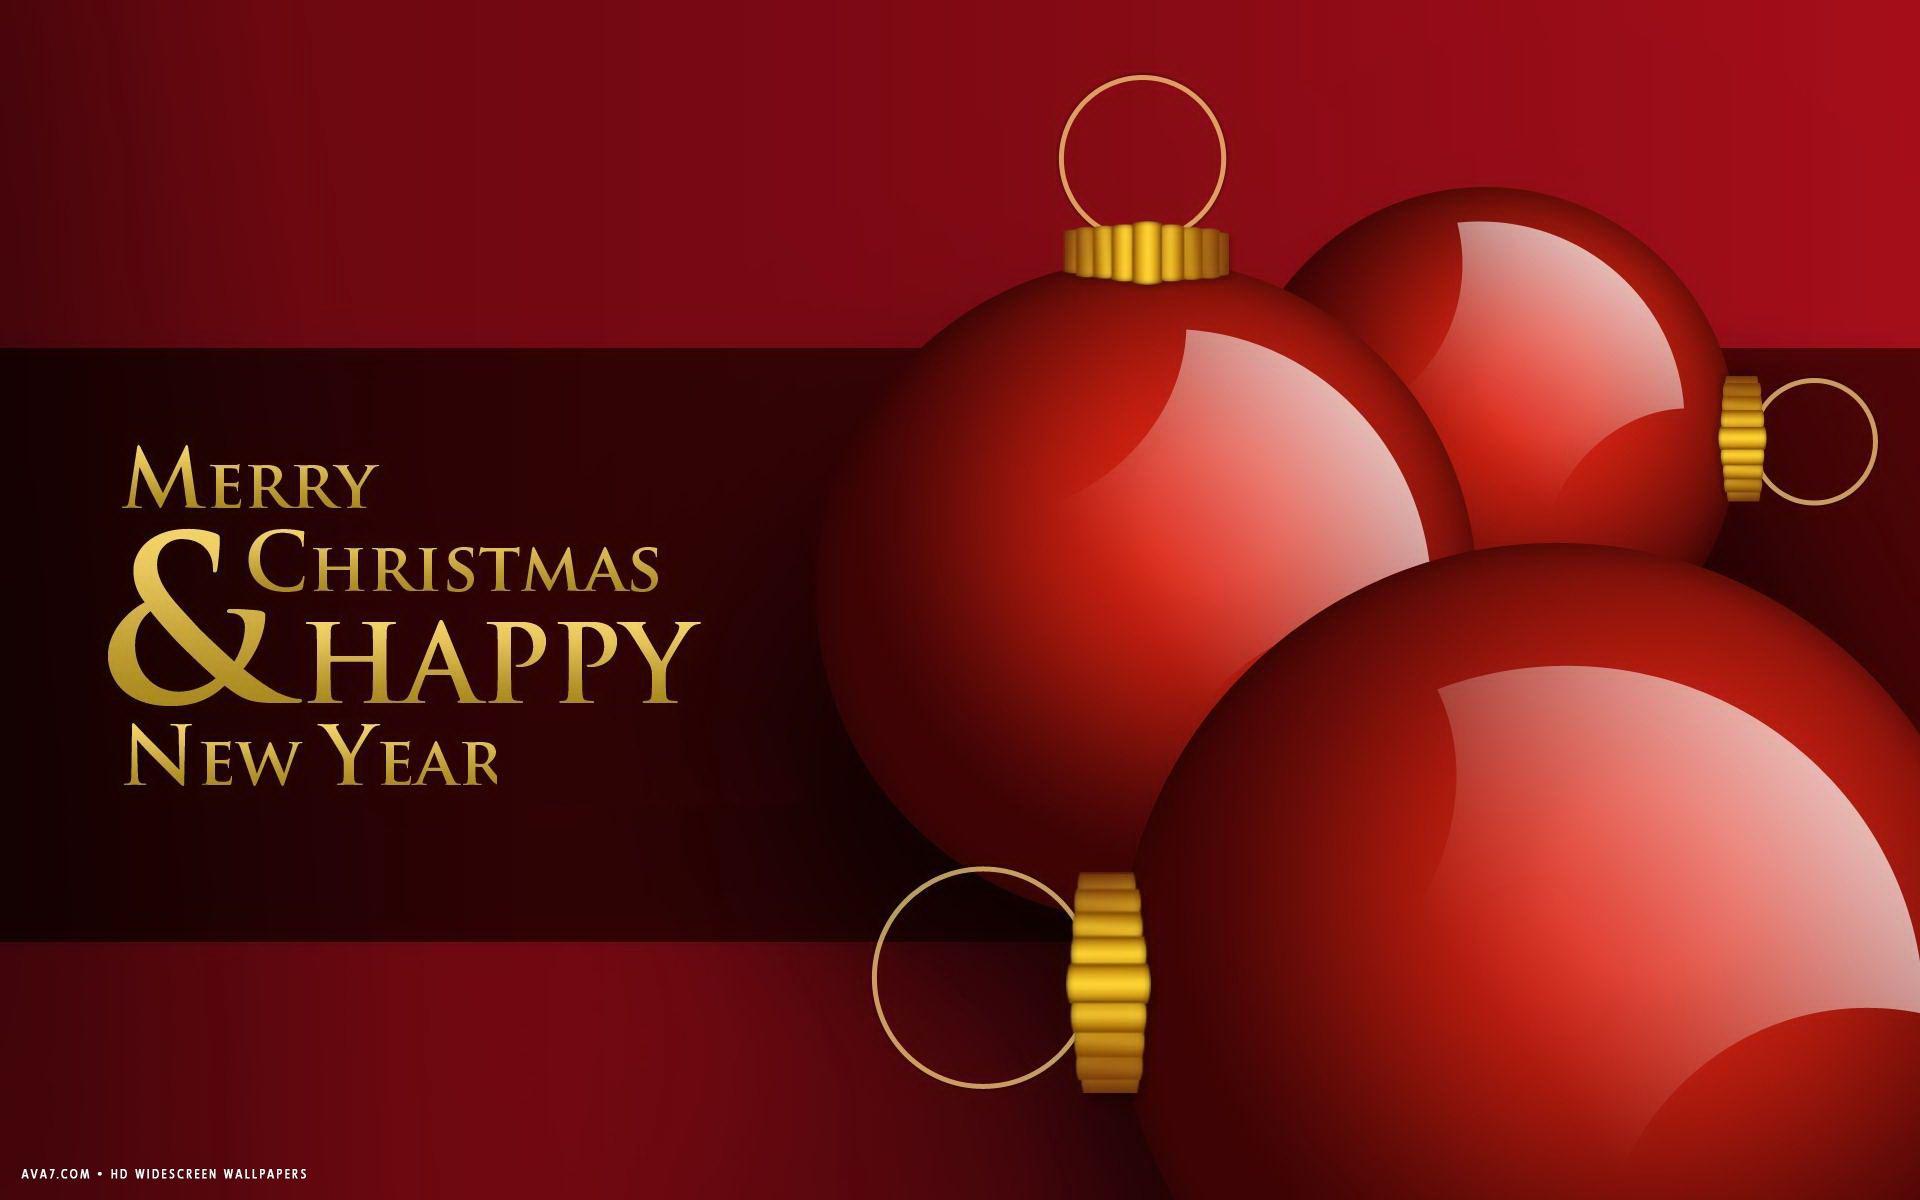 Merry Christmas and Happy New Year Wallpapers - Top Free Merry